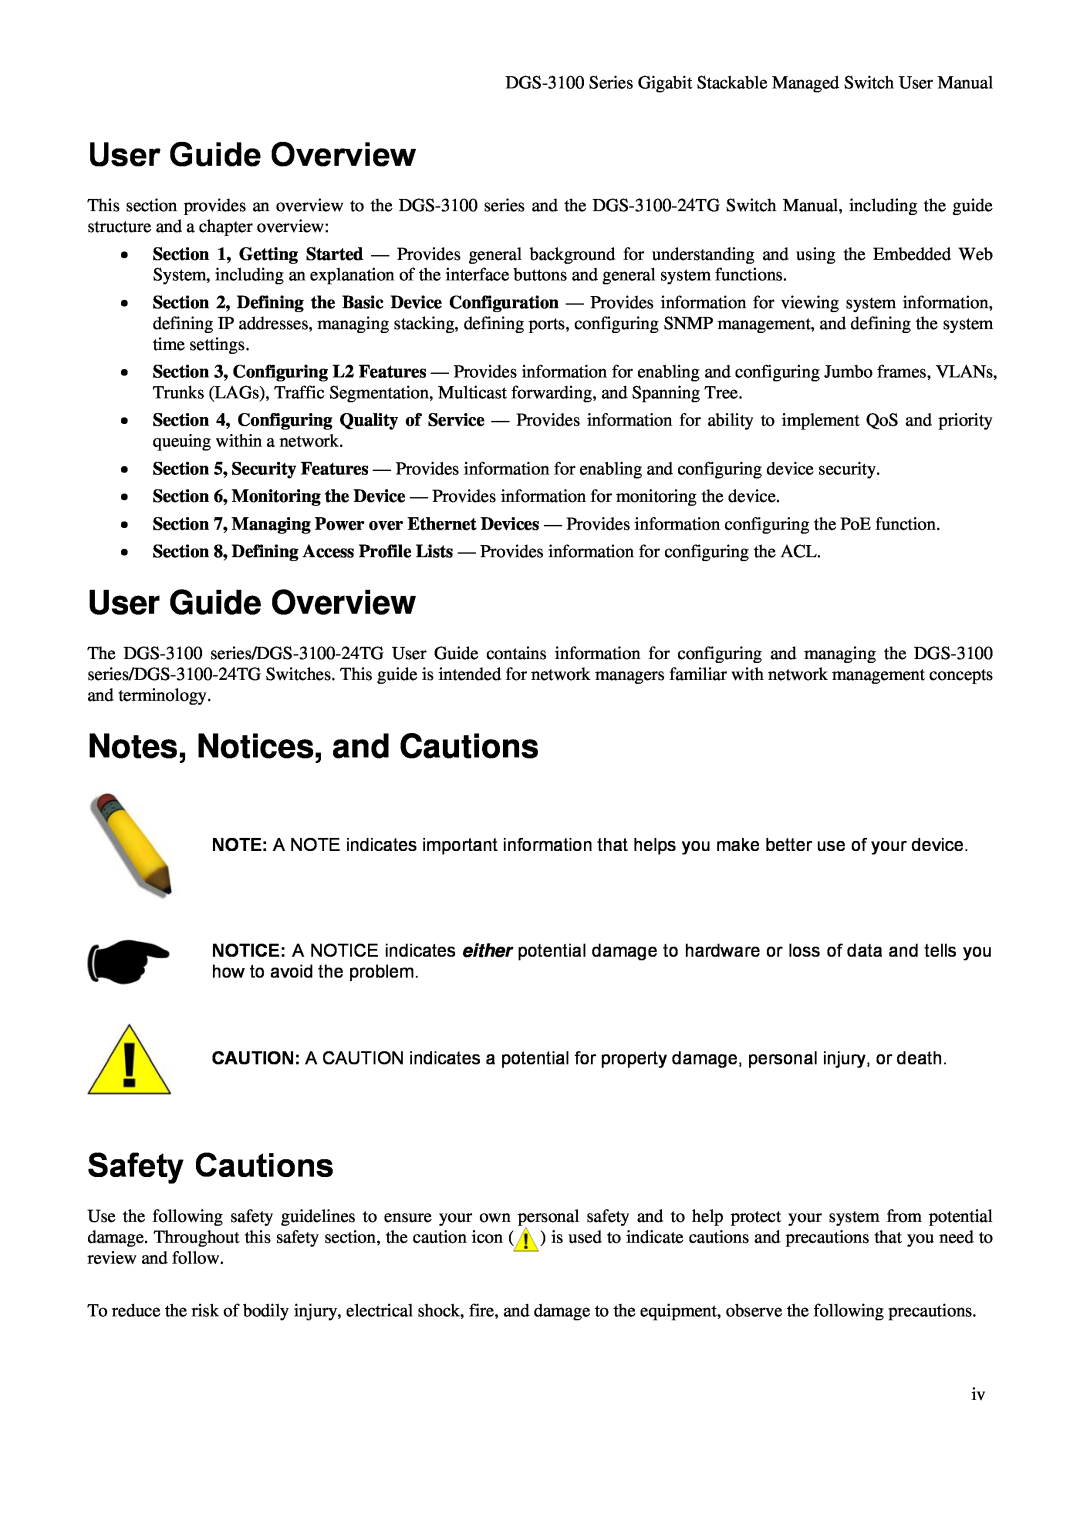 D-Link DGS-3100 user manual User Guide Overview, Notes, Notices, and Cautions, Safety Cautions 